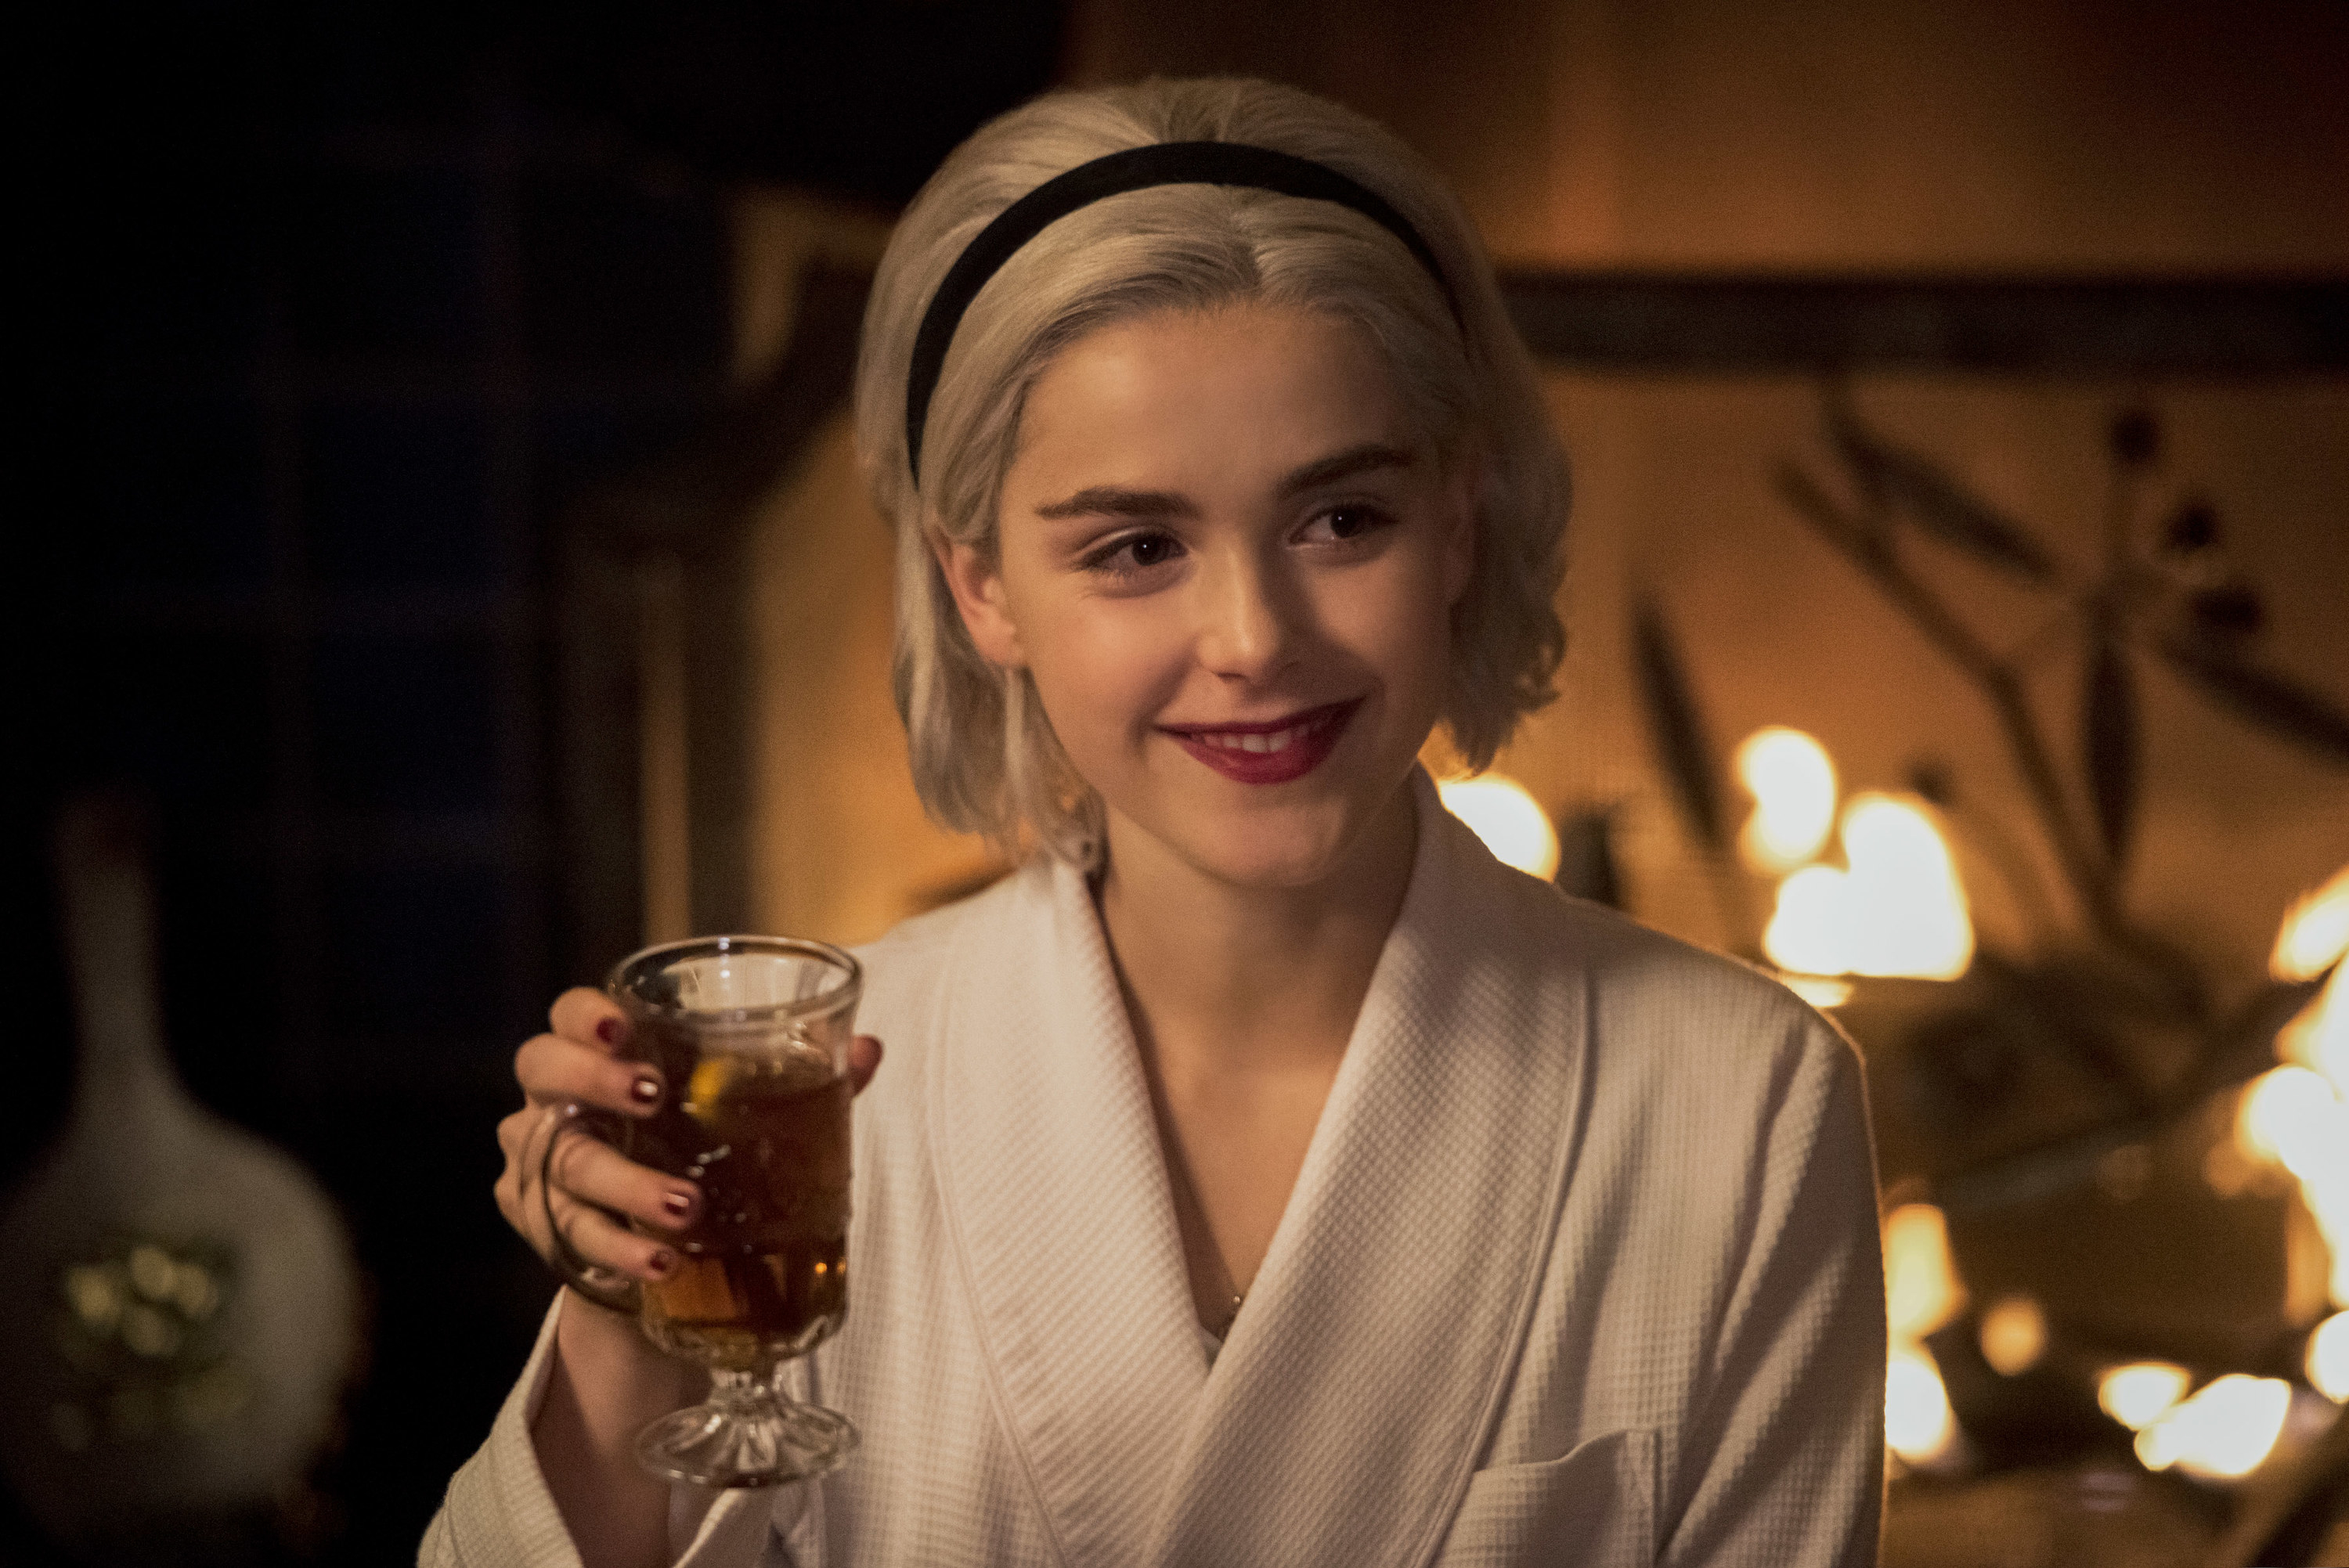 Sabrina holding a drink and smiling